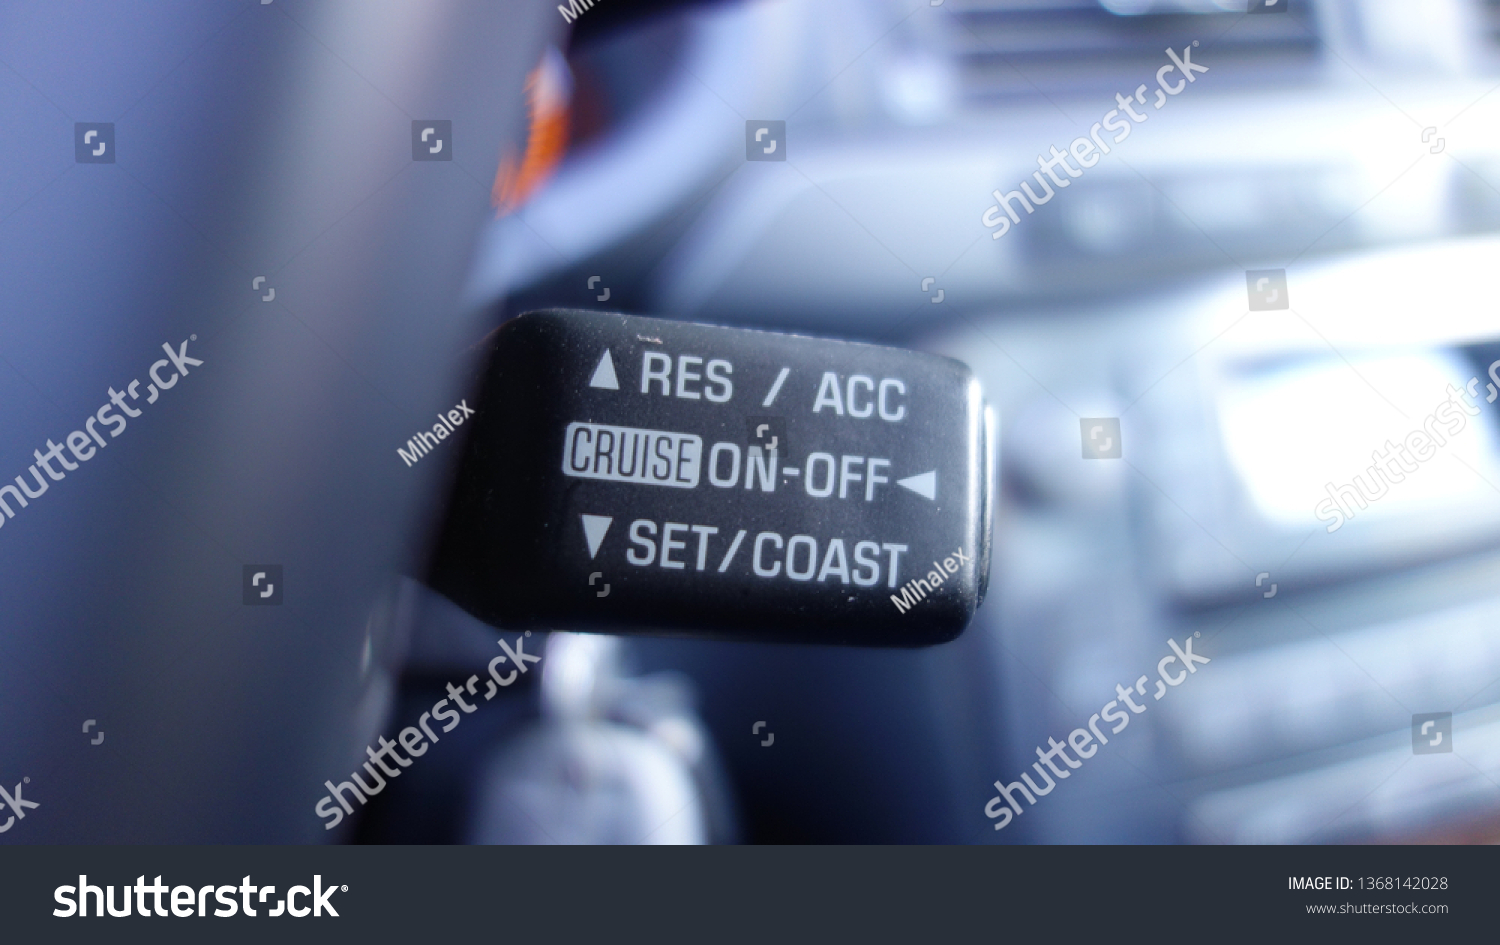 Car details-cruise control switch on the back of the steering wheel with res/acc/cruise/on/off/set/coast commands.  #1368142028